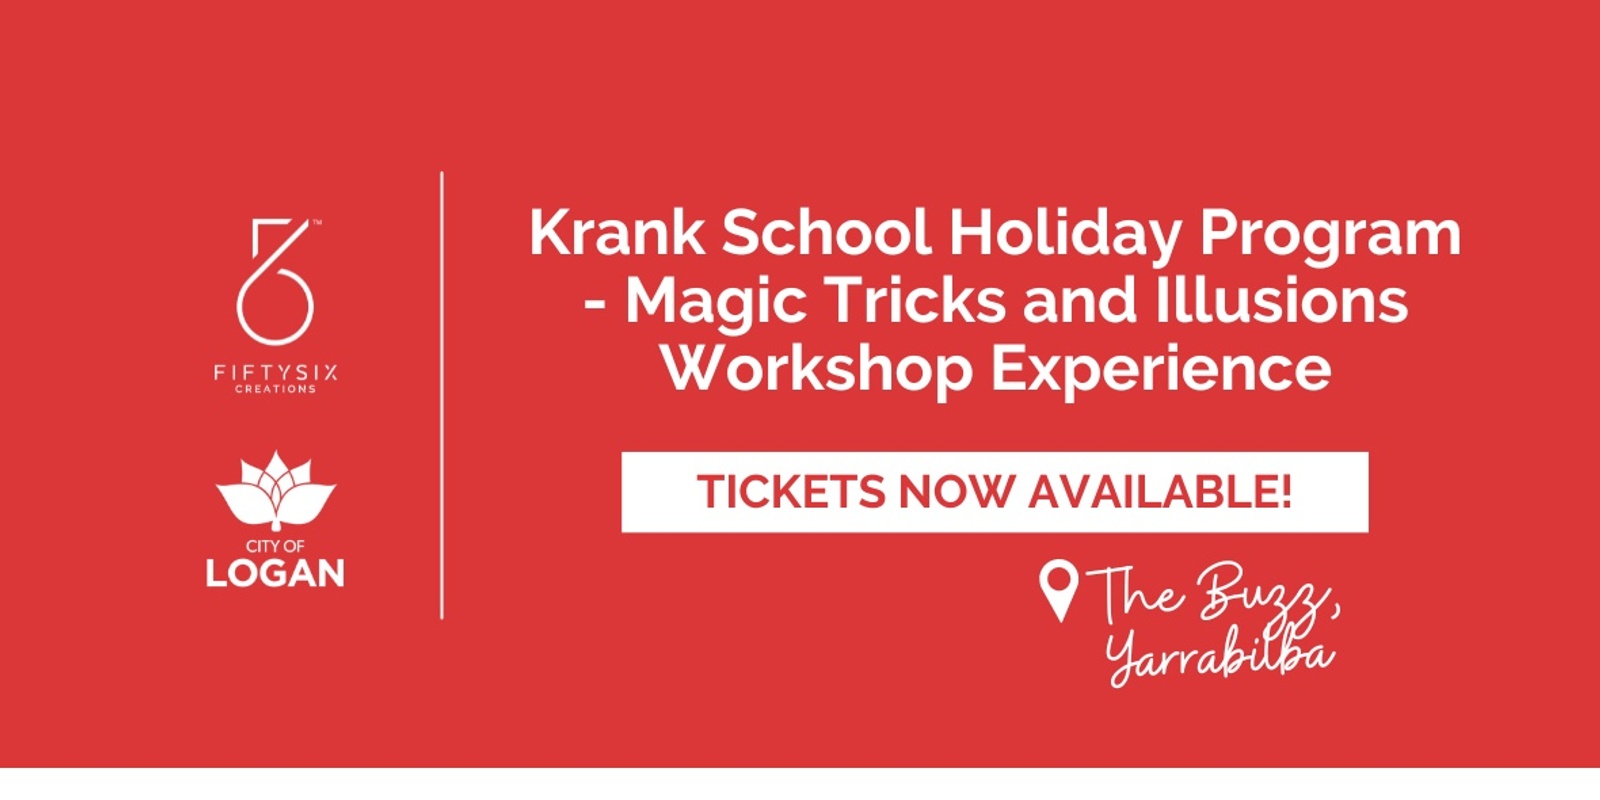 Banner image for Magic Tricks and Illusions Workshop Experience - Krank School Holiday Program